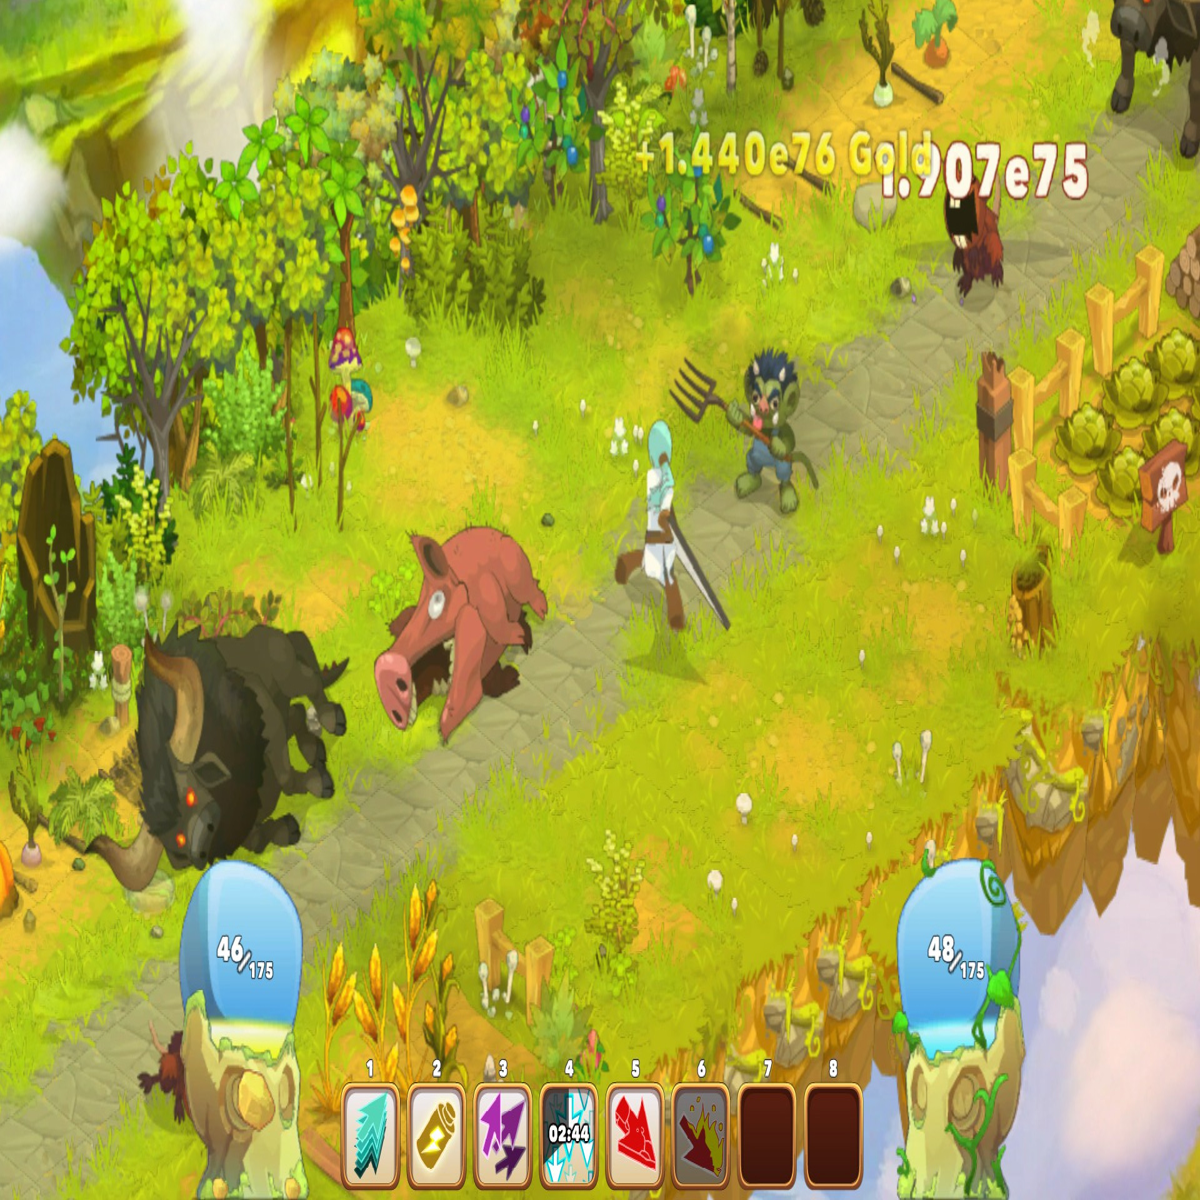 Clicker Heroes is the fastest way to destroy your mouse - Quarter